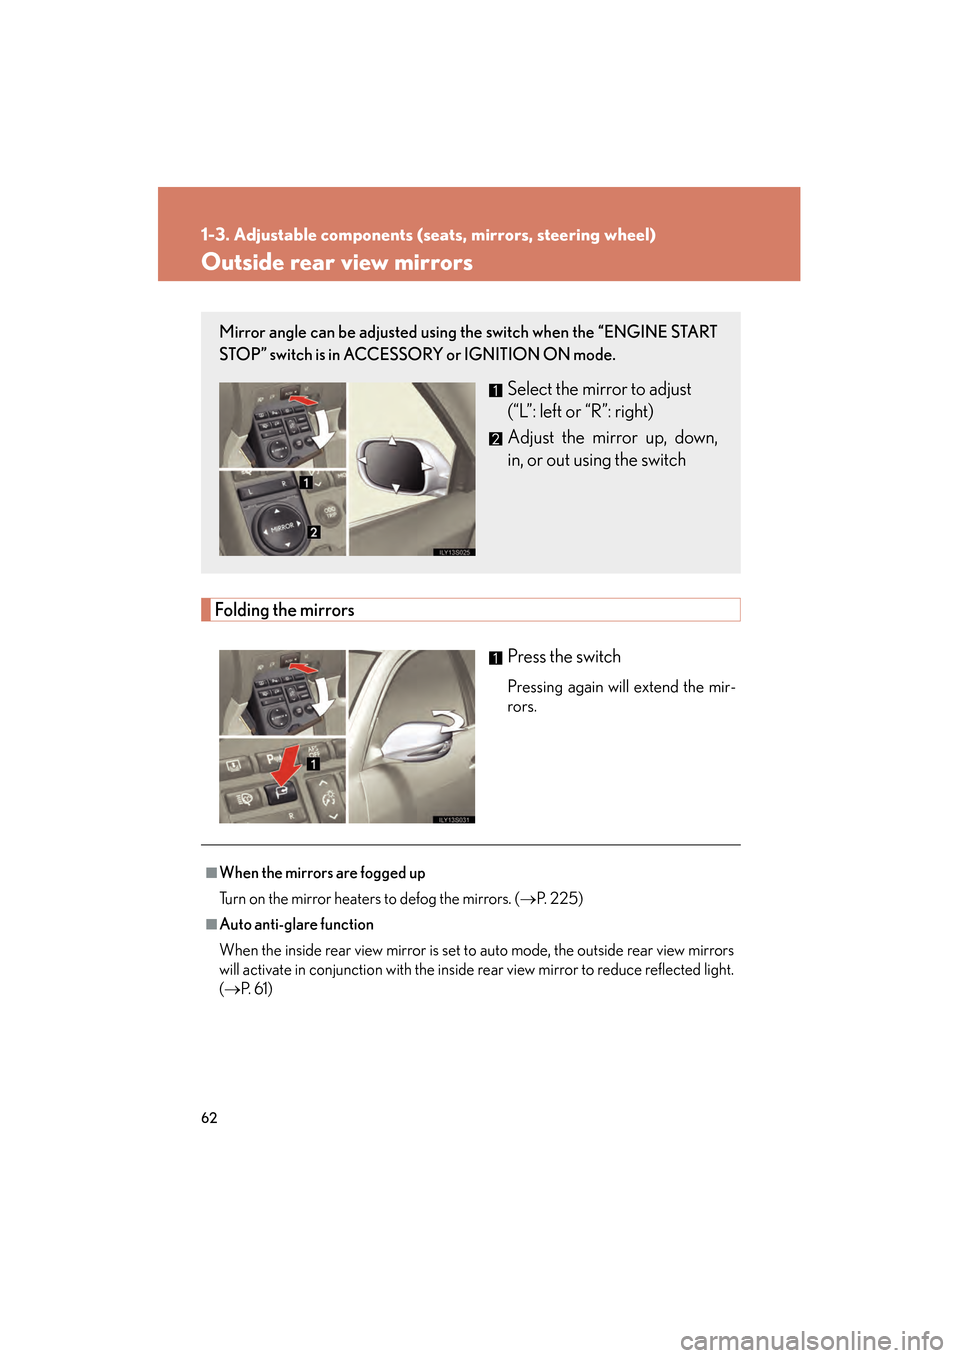 Lexus GS350 2008 Repair Manual 62
1-3. Adjustable components (seats, mirrors, steering wheel)
GS_G_U
June 19, 2008 12:54 pm
Outside rear view mirrors
Folding the mirrorsPress the switch
Pressing again will extend the mir-
rors.
Mir